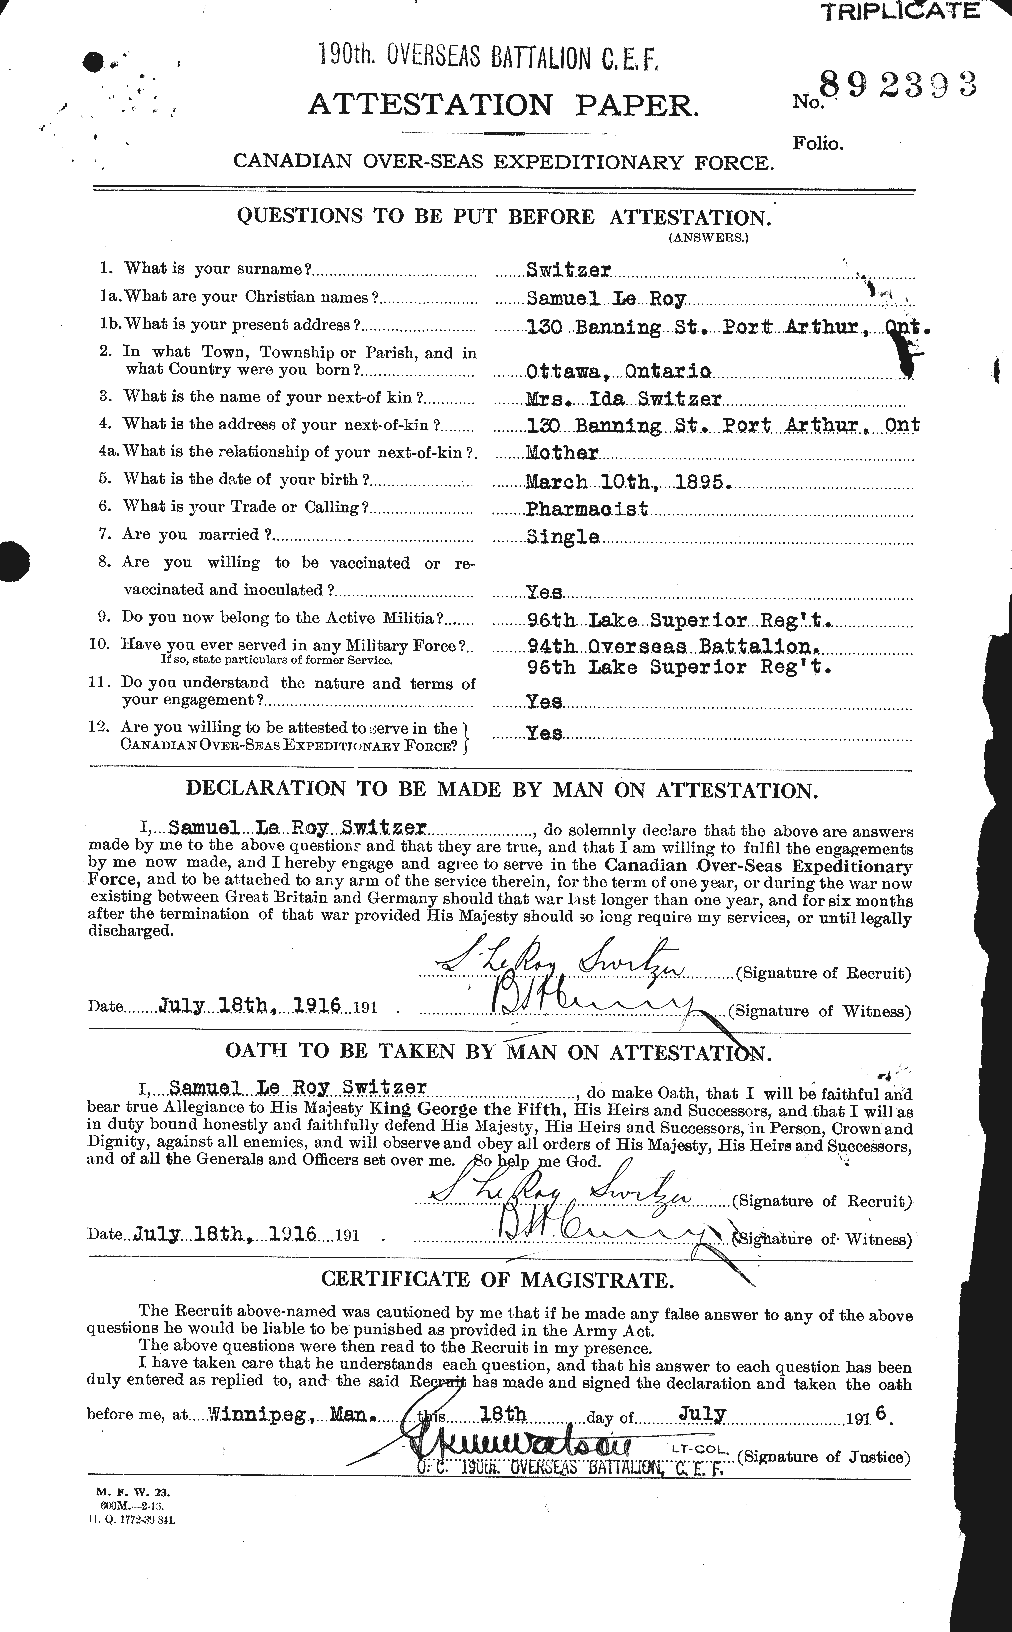 Personnel Records of the First World War - CEF 624864a